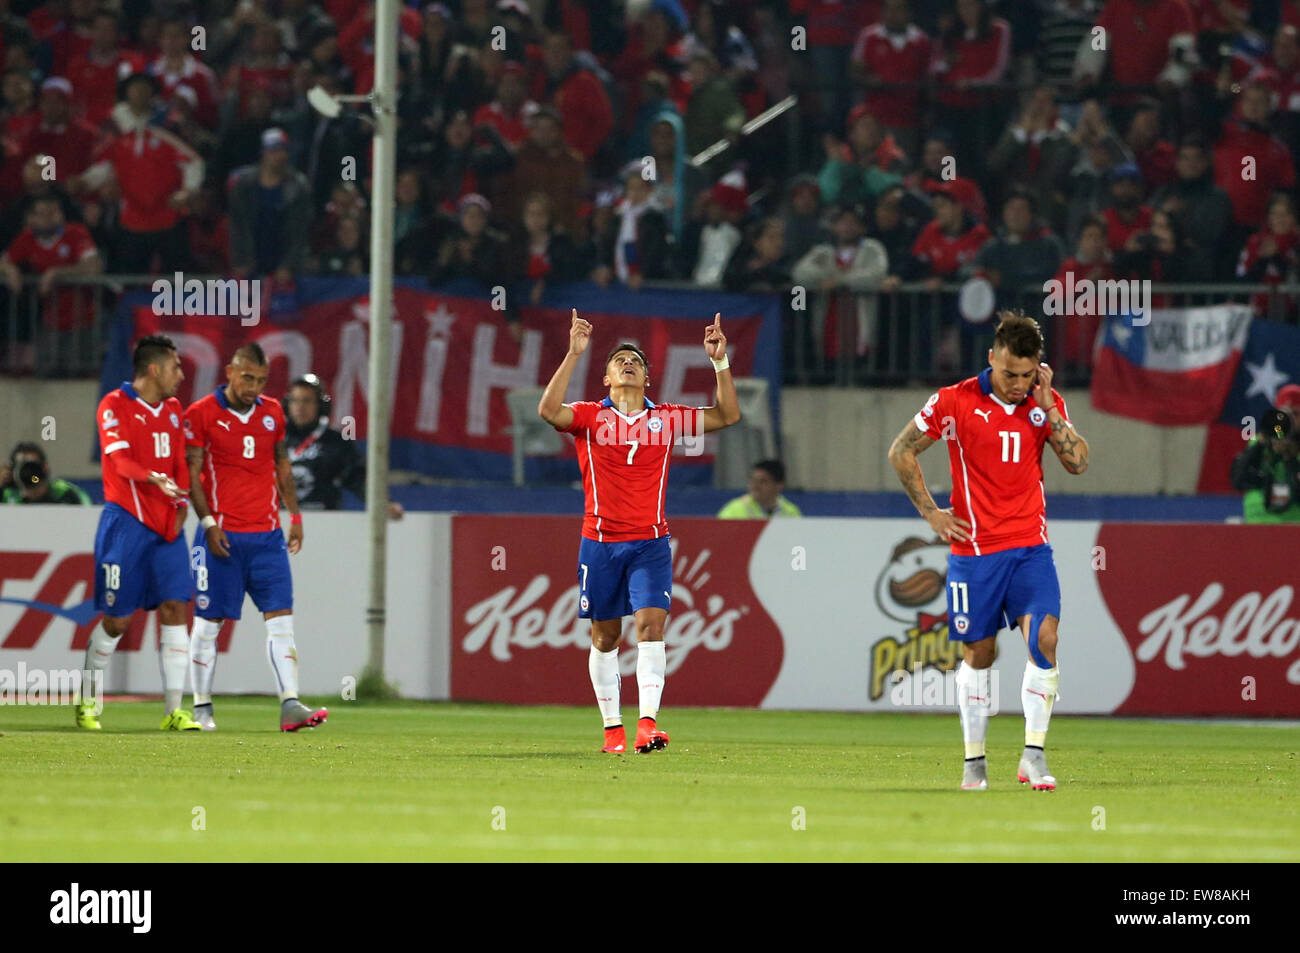 Santiago, Chile. 19th June, 2015. Chile's Alexis Sanchez (C) celebrates his score during the Group A match of the Copa America Chile 2015, against Bolivia, held in the National Stadium, in Santiago, Chile, on June 19, 2015. Chile won 5-0. Credit:  Jorge Villegas/Xinhua/Alamy Live News Stock Photo